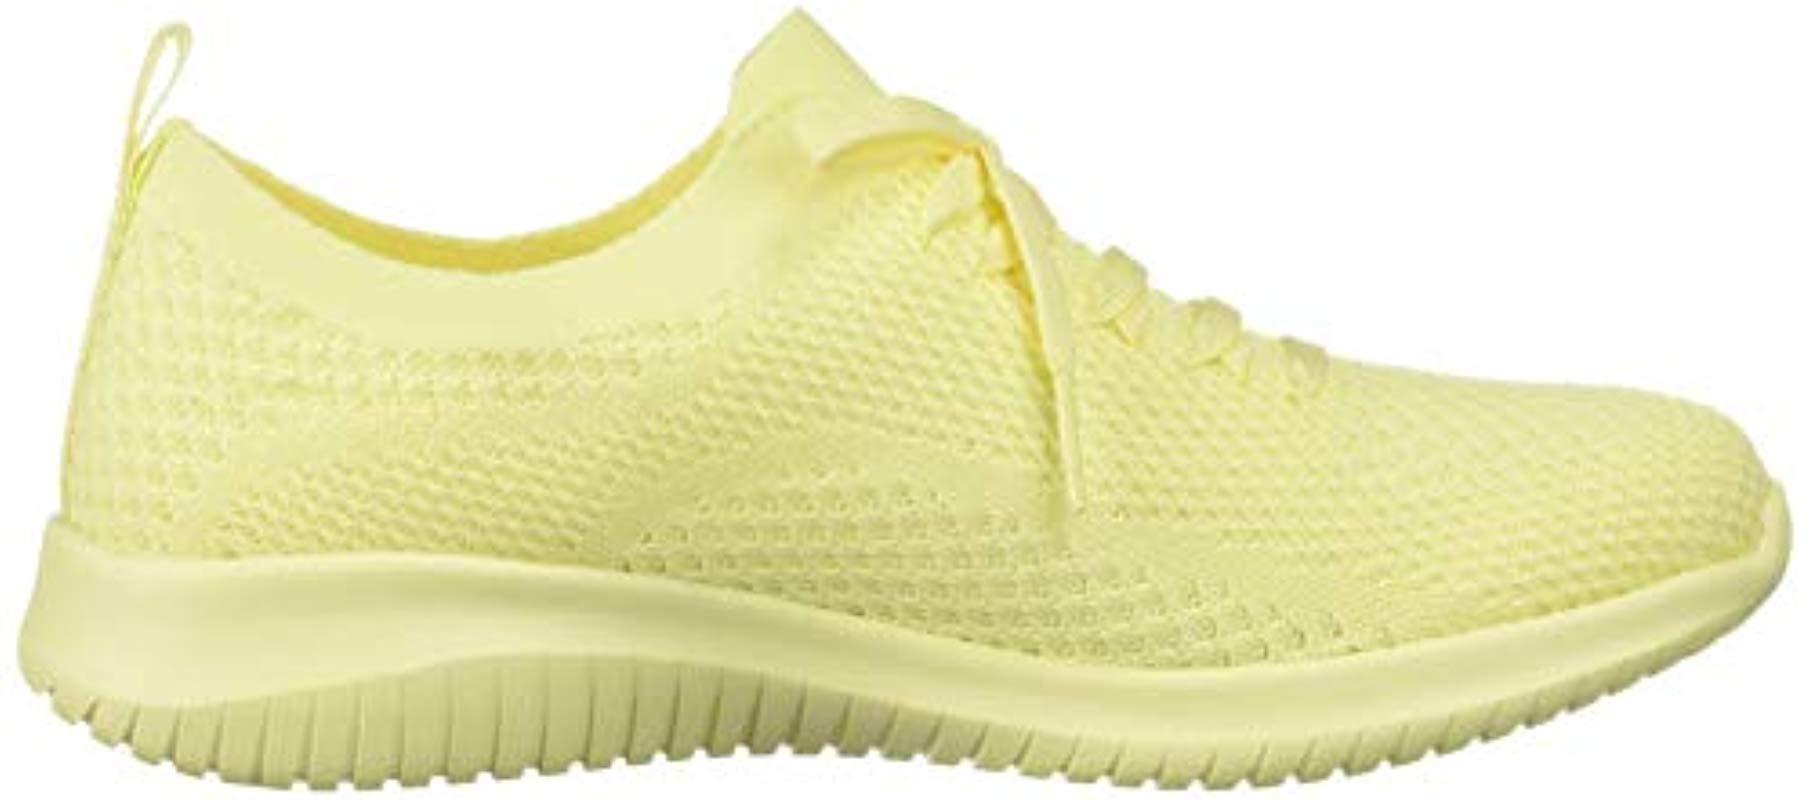 Skechers Ultra Flex- Pastel Party Trainers in Yellow - Lyst